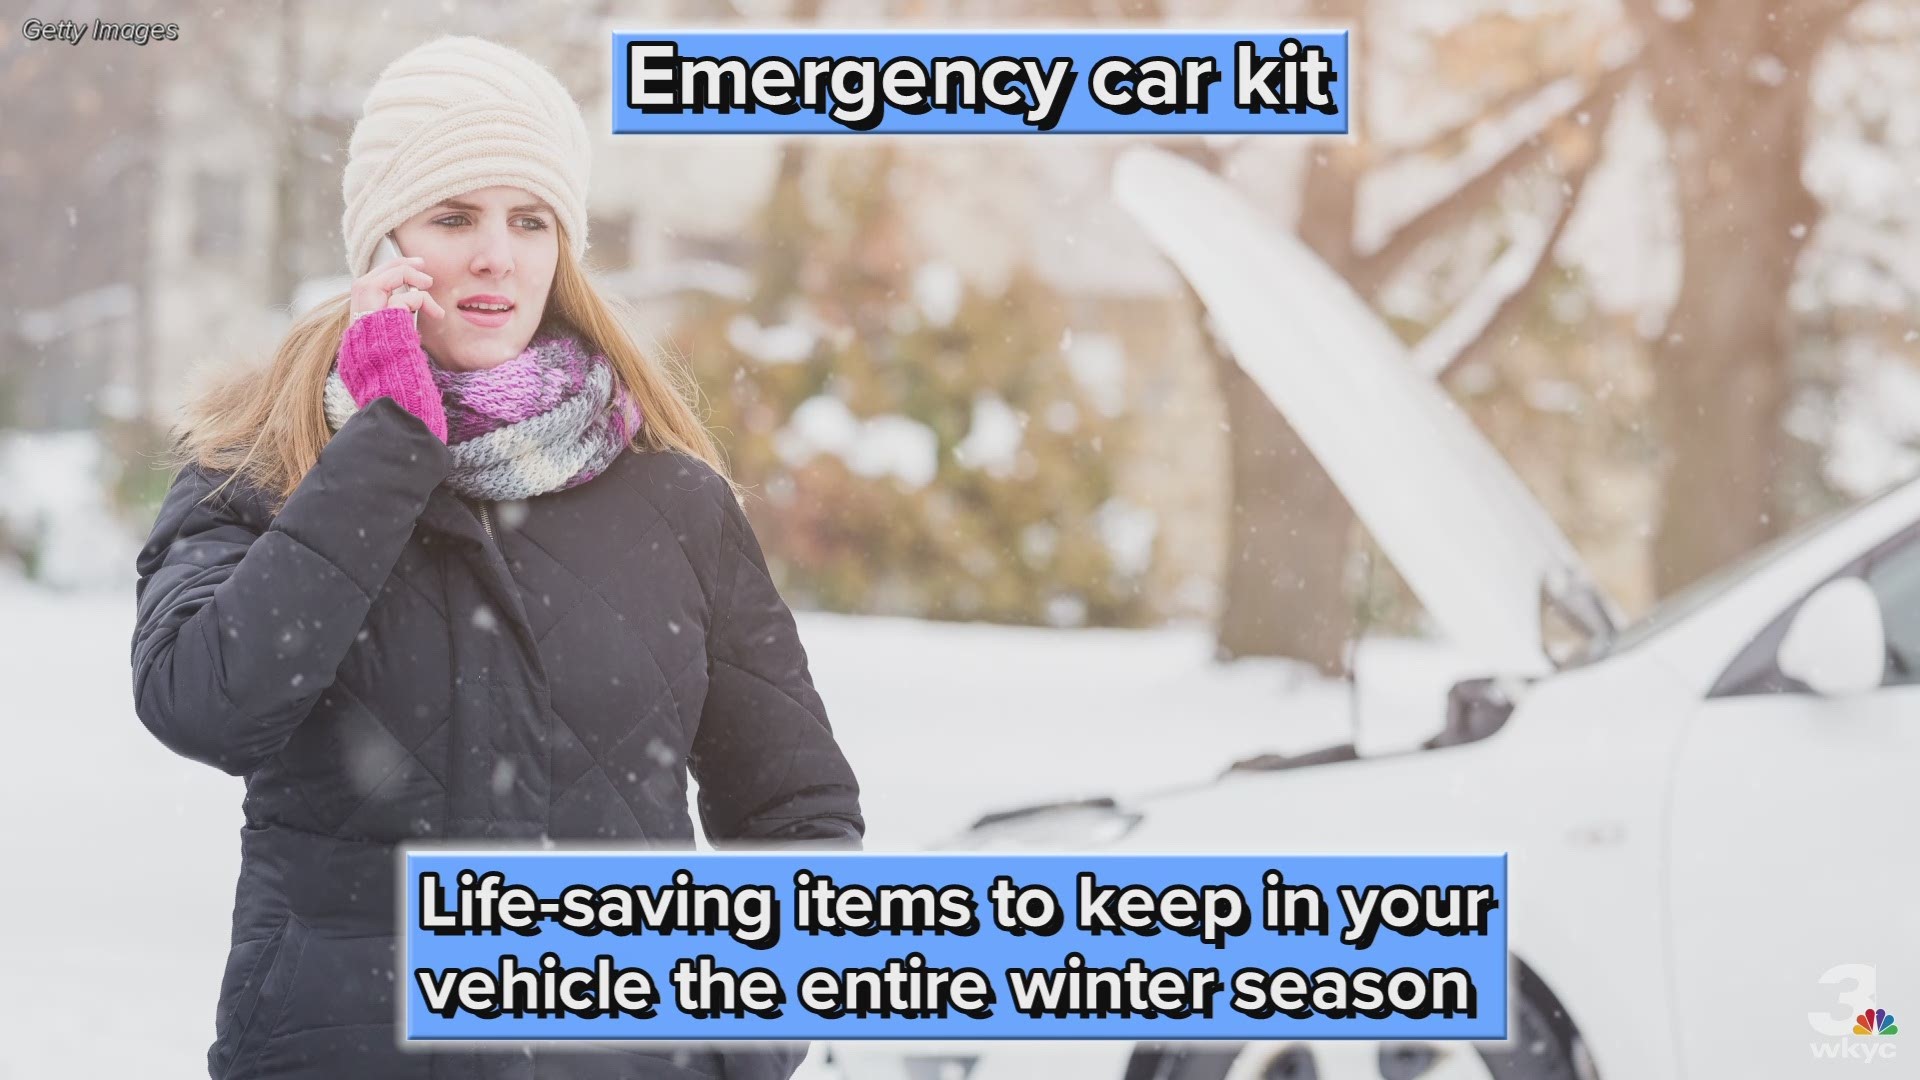 Life-saving items to keep in your vehicle